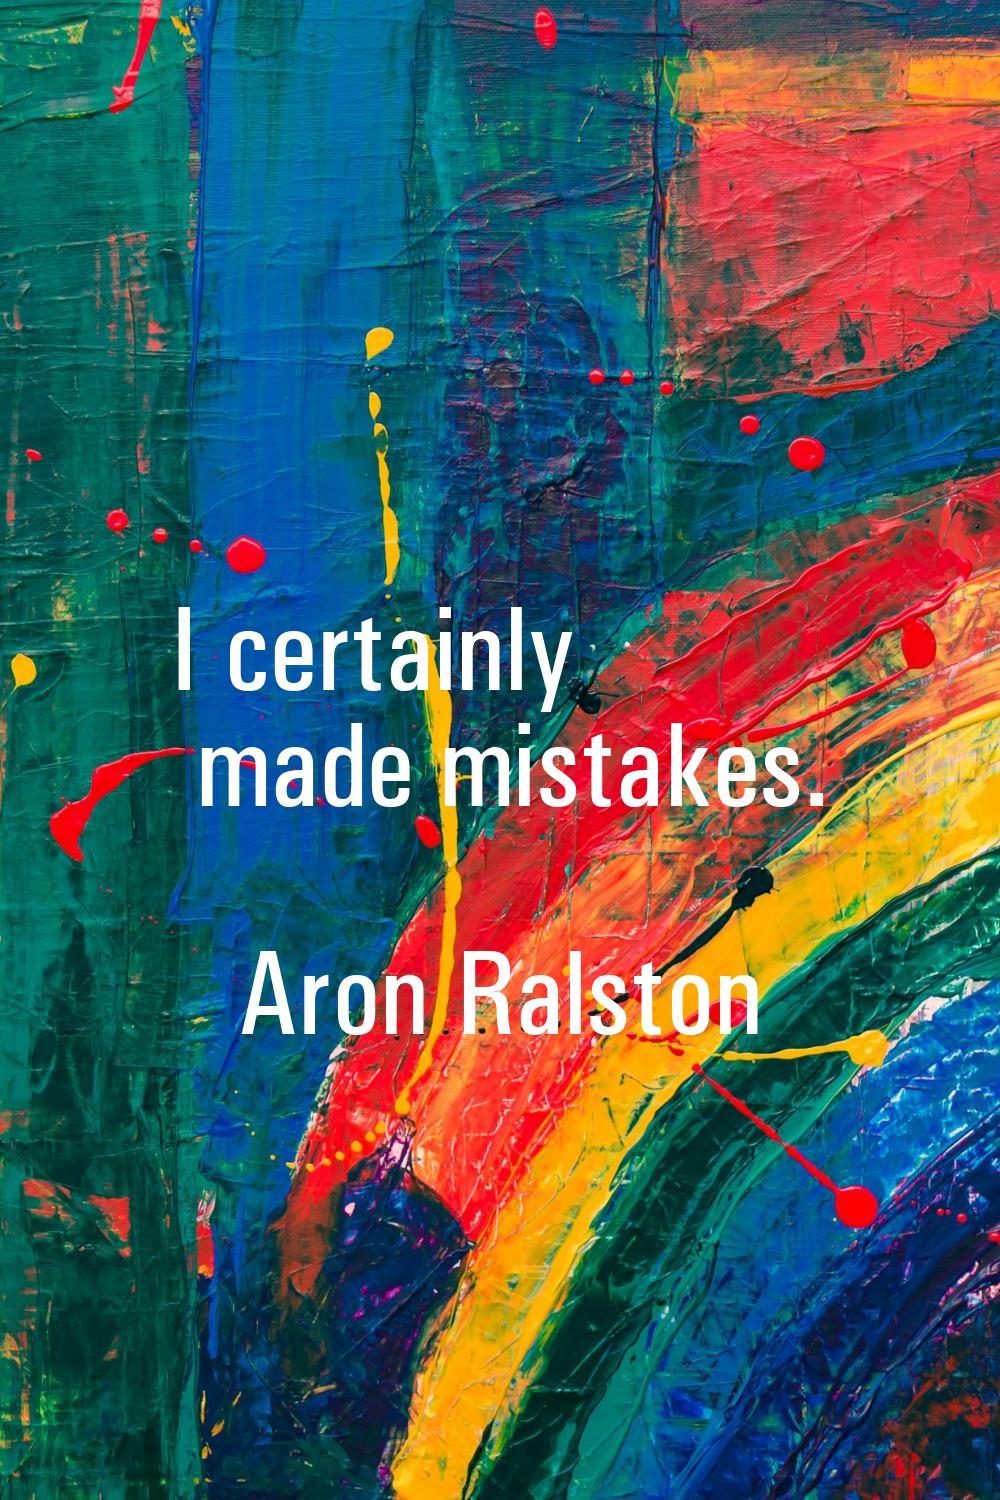 I certainly made mistakes.